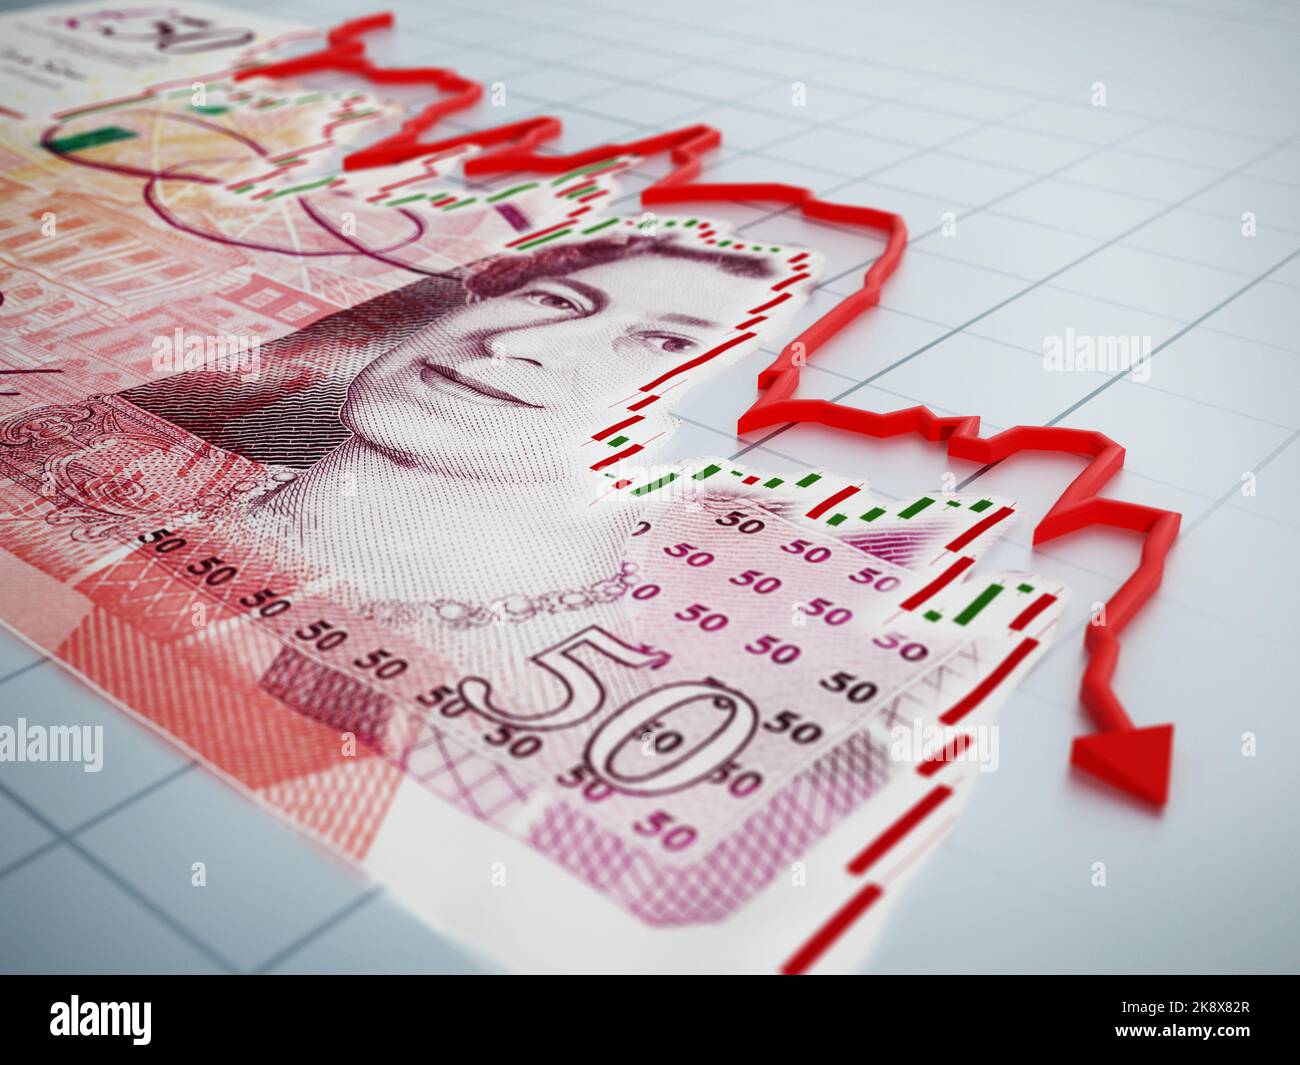 Falling Pound or Sterling value. 3D illustration. Stock Photo